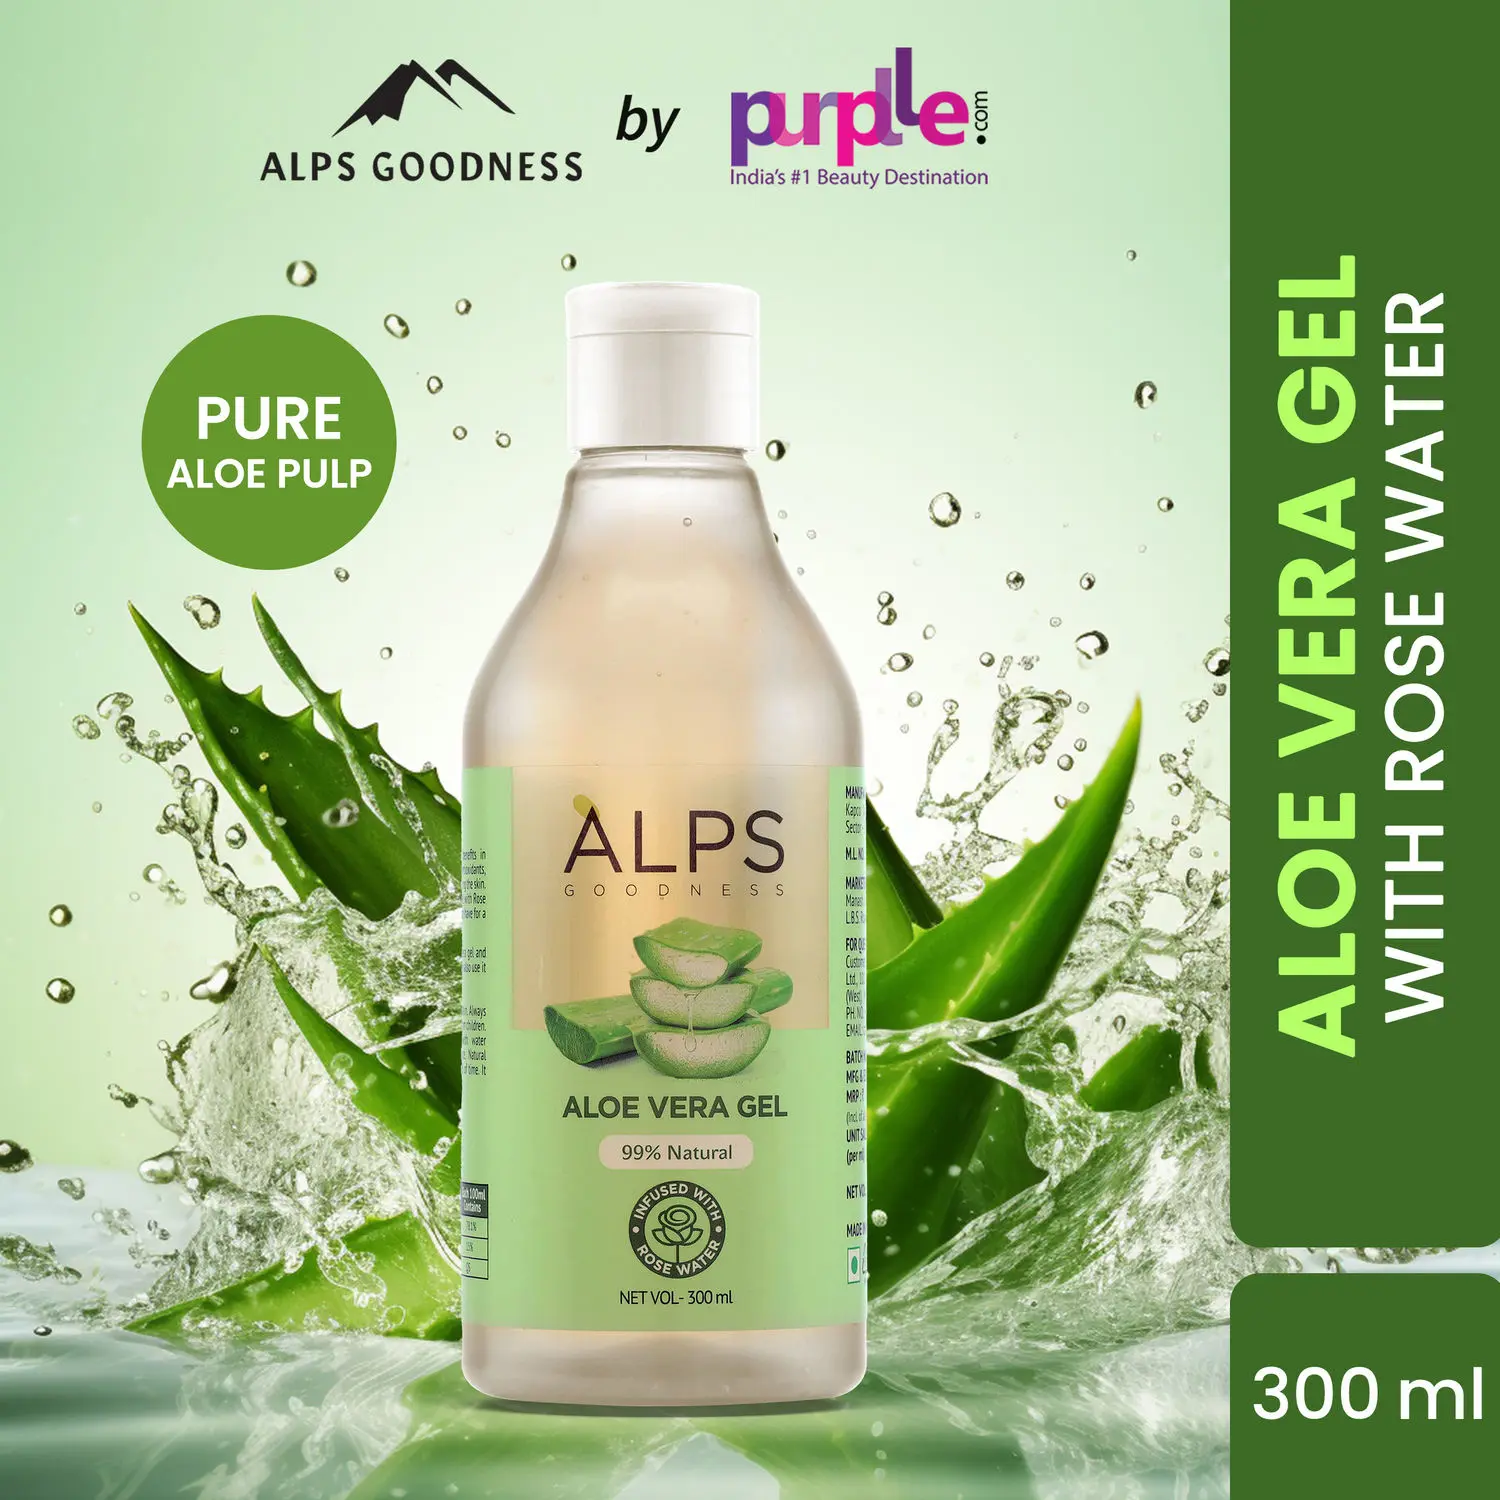 Alps Goodness Aloe Vera Gel infused with Rose Water 300 ml I Natural Moisturizer I For Soft Skin I Soothing & Refreshing I For All Skin & Hair Types I Leave-In Conditioner